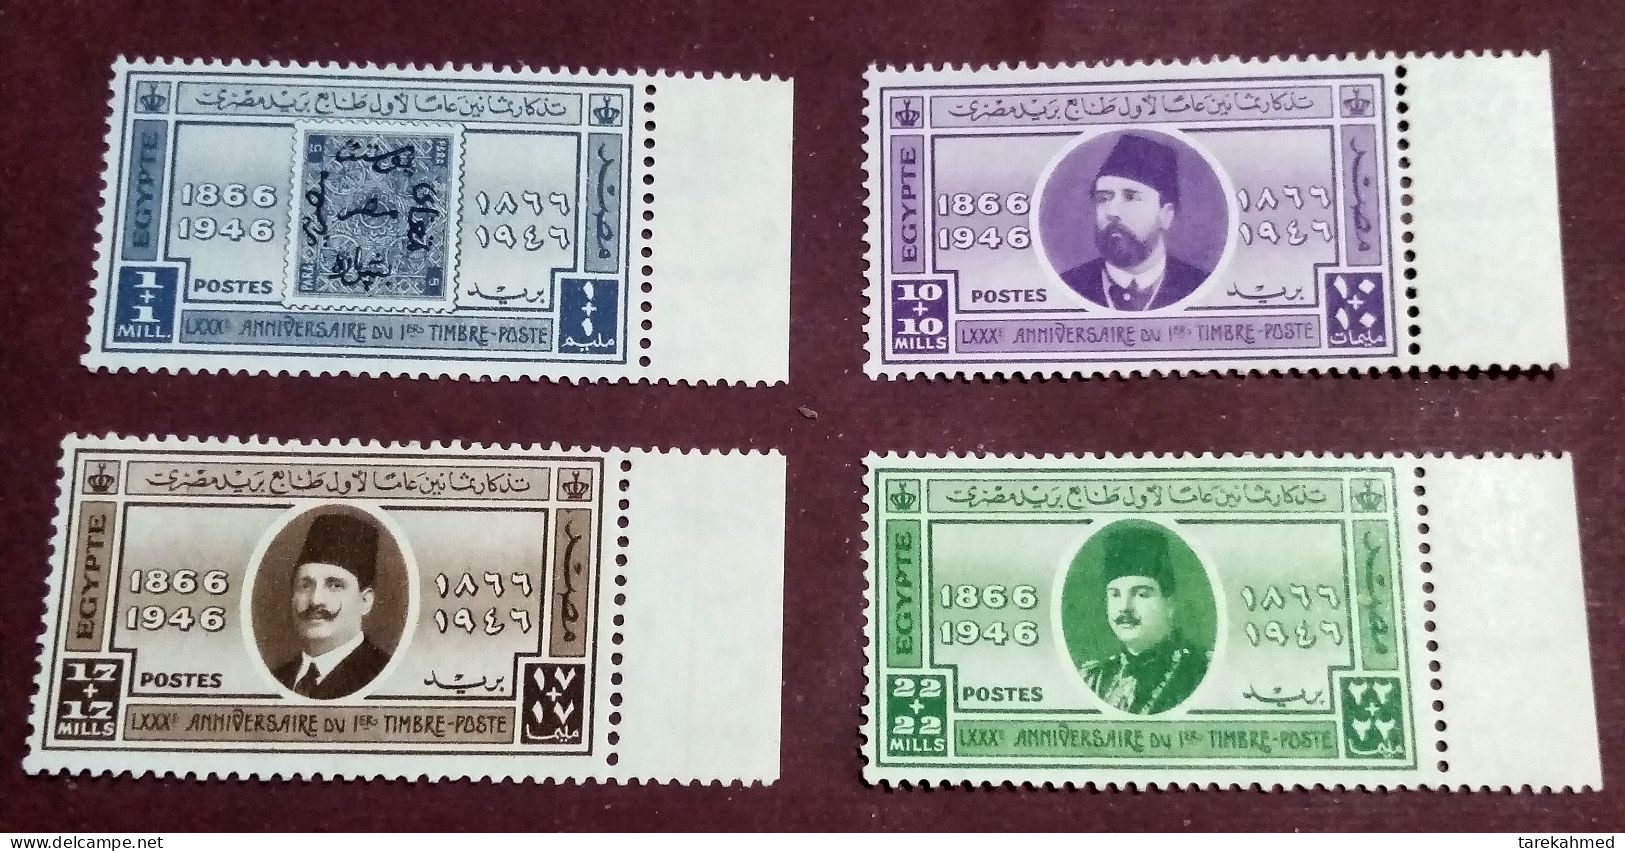 Egypt 1946 - Complete Set Of The 80th Anniv. Of Egypt’s 1st Postage Stamp - MNH With Margin, Original Gum. - Neufs